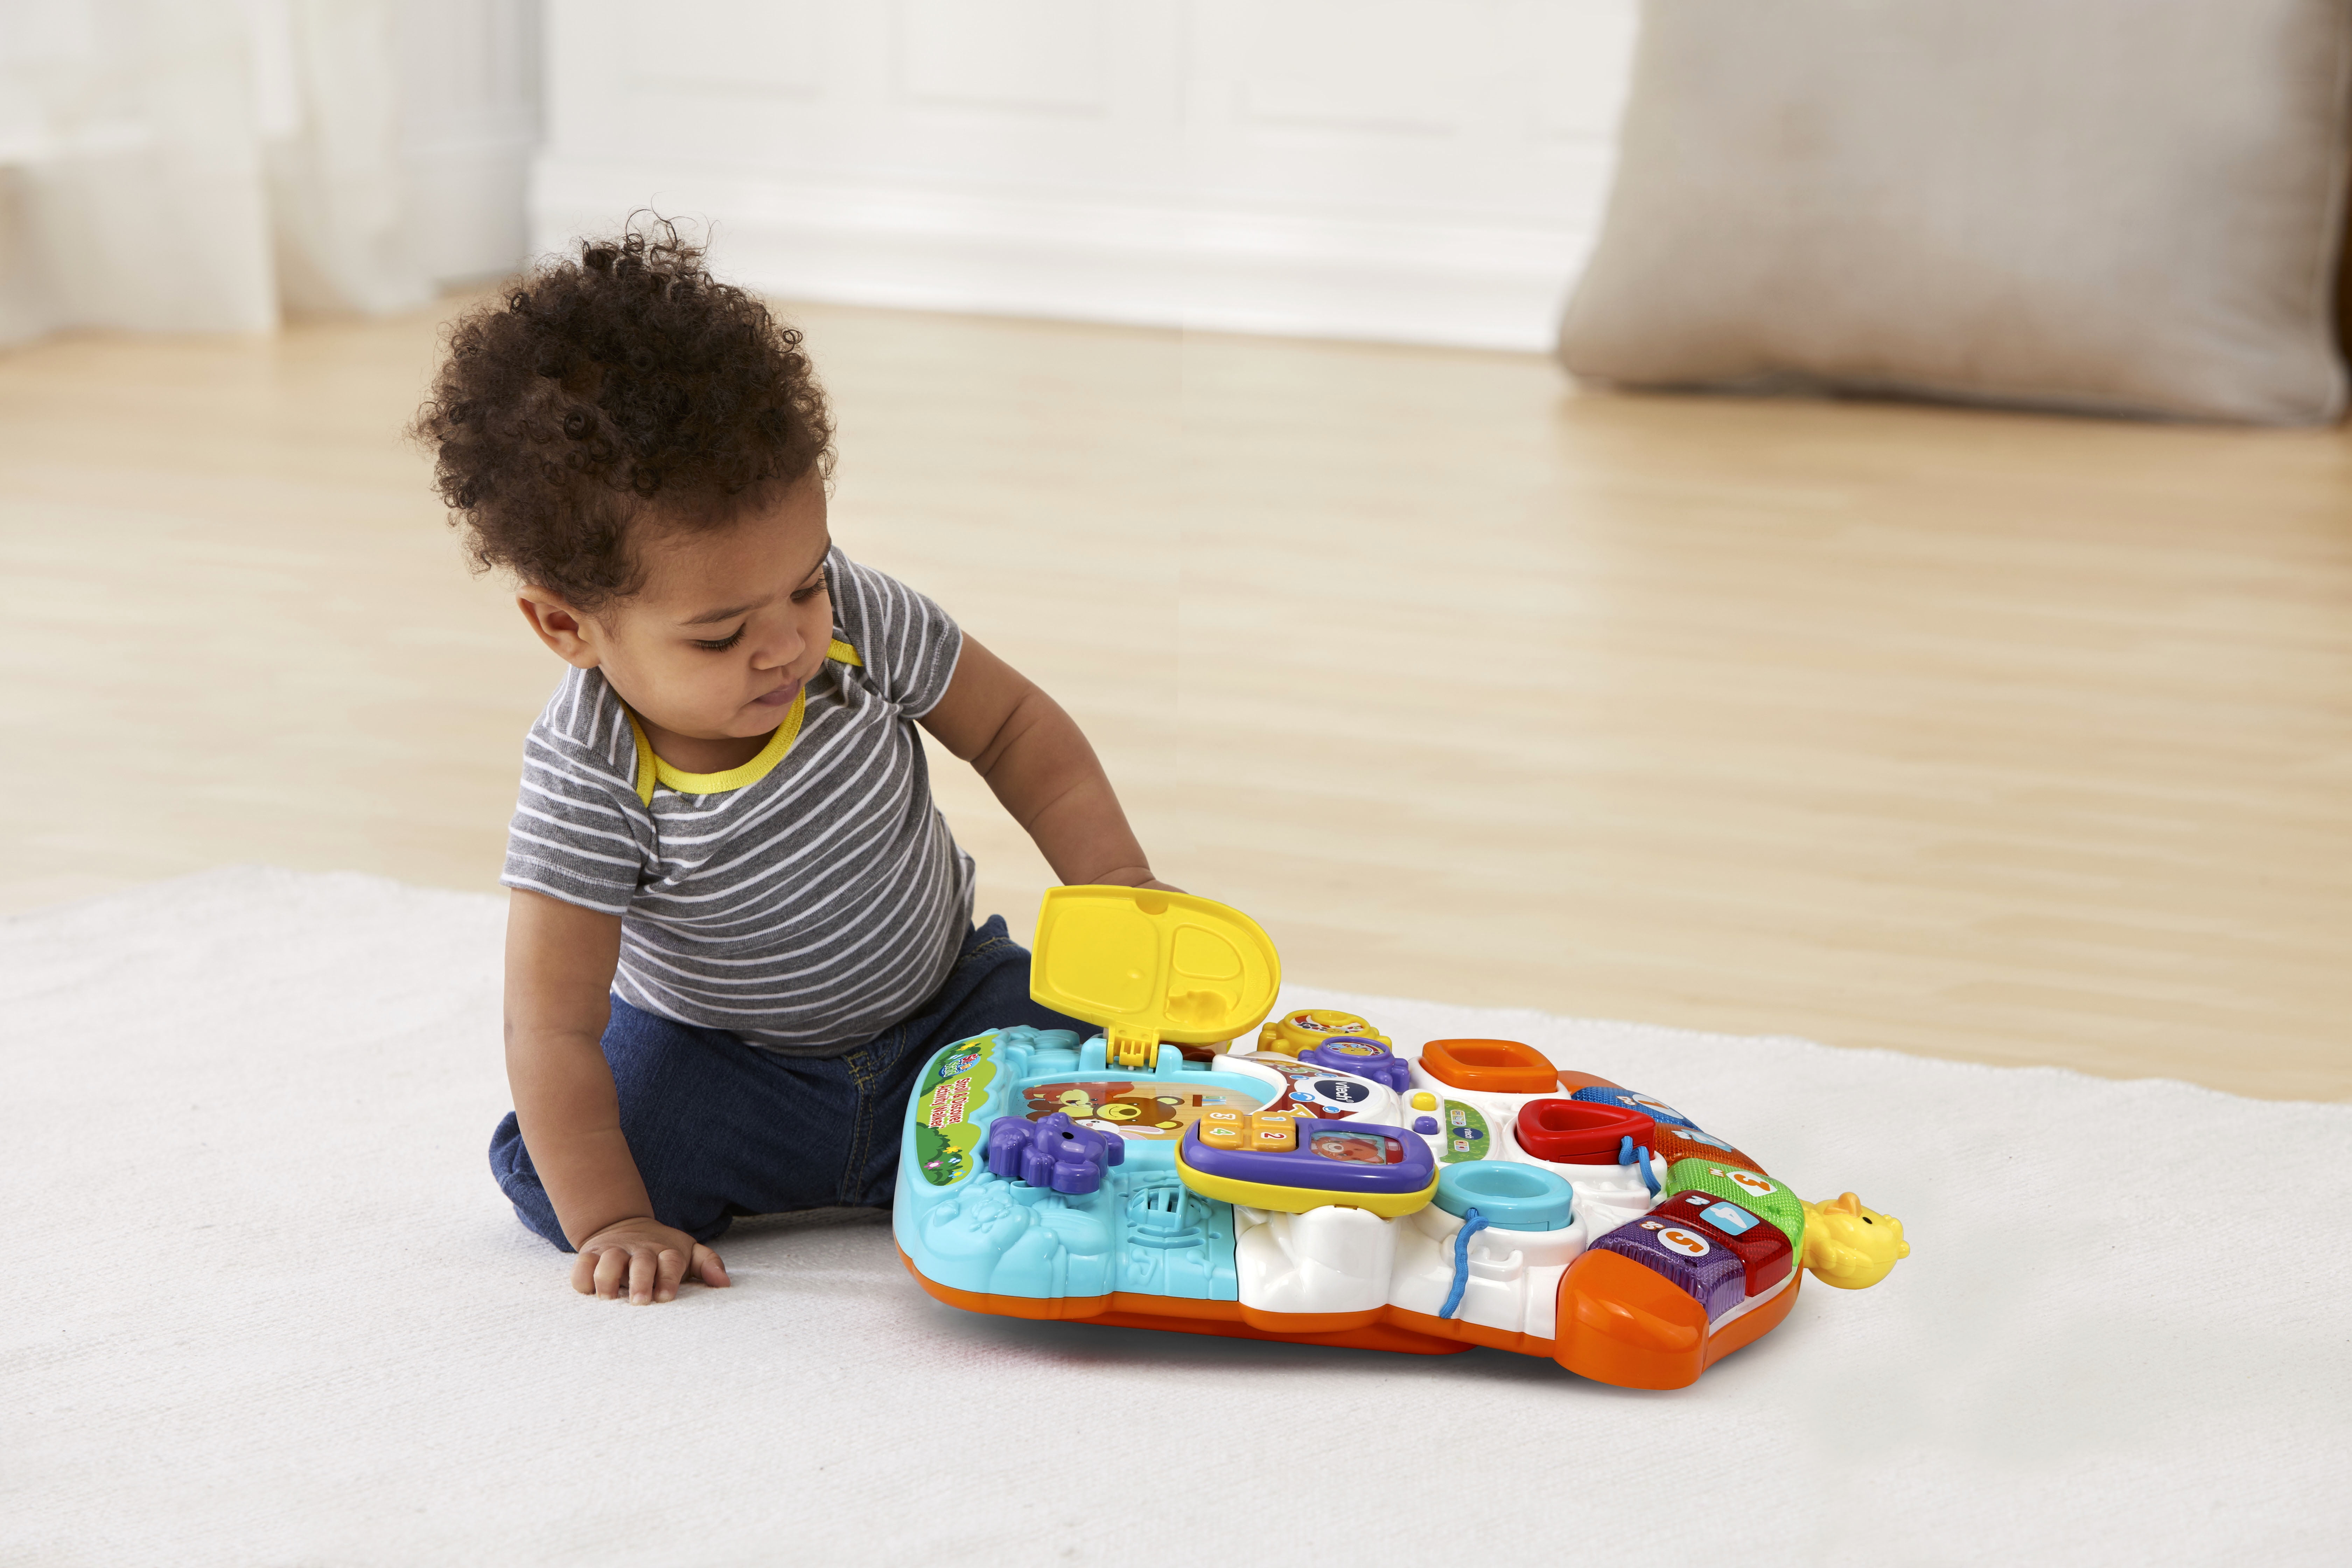 vtech stroll and discover activity walker